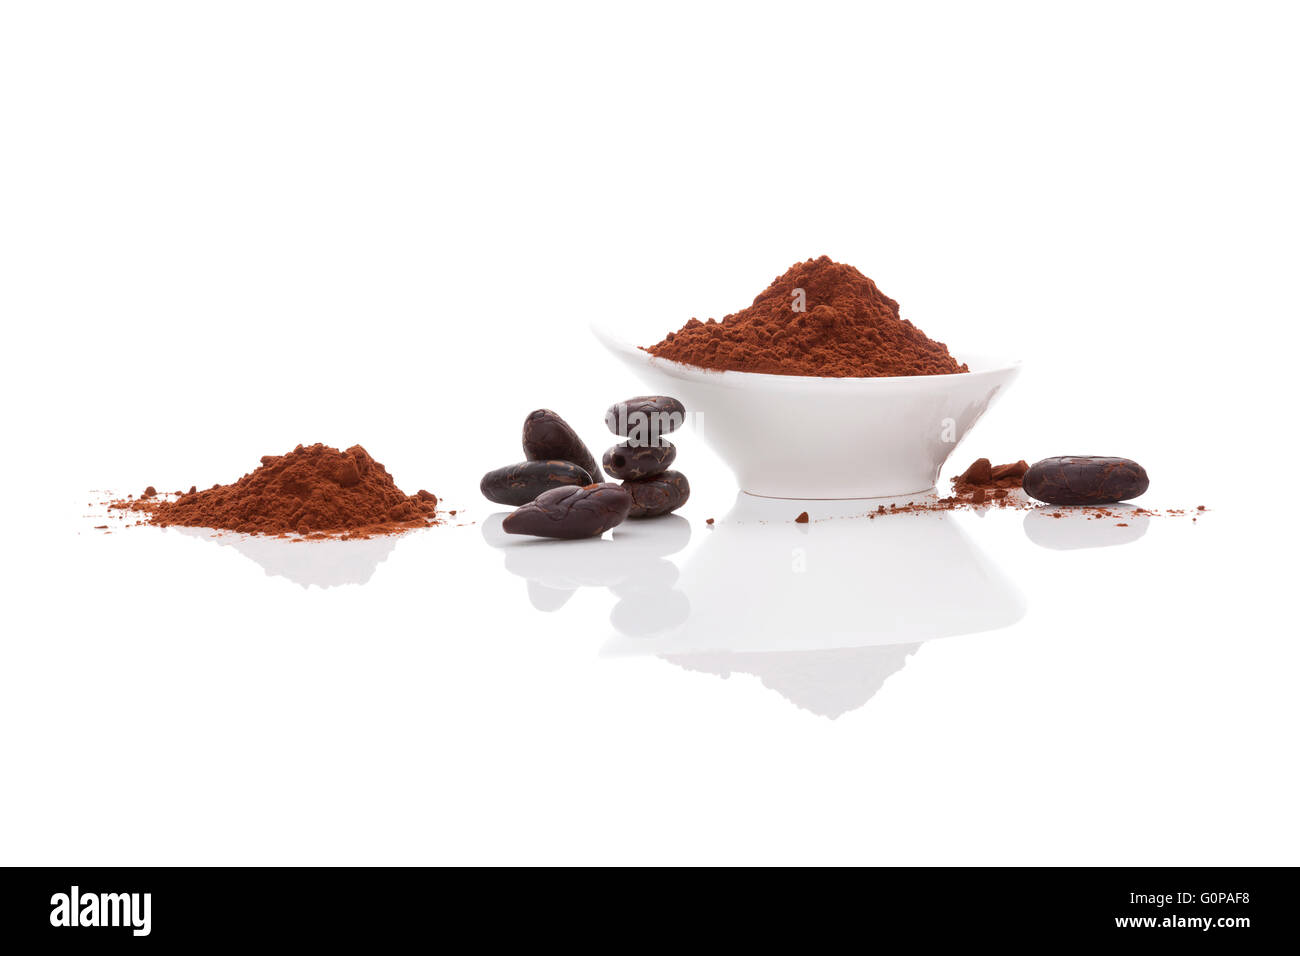 Cocoa beans and cocoa powder on white background. Healthy superfood. Stock Photo